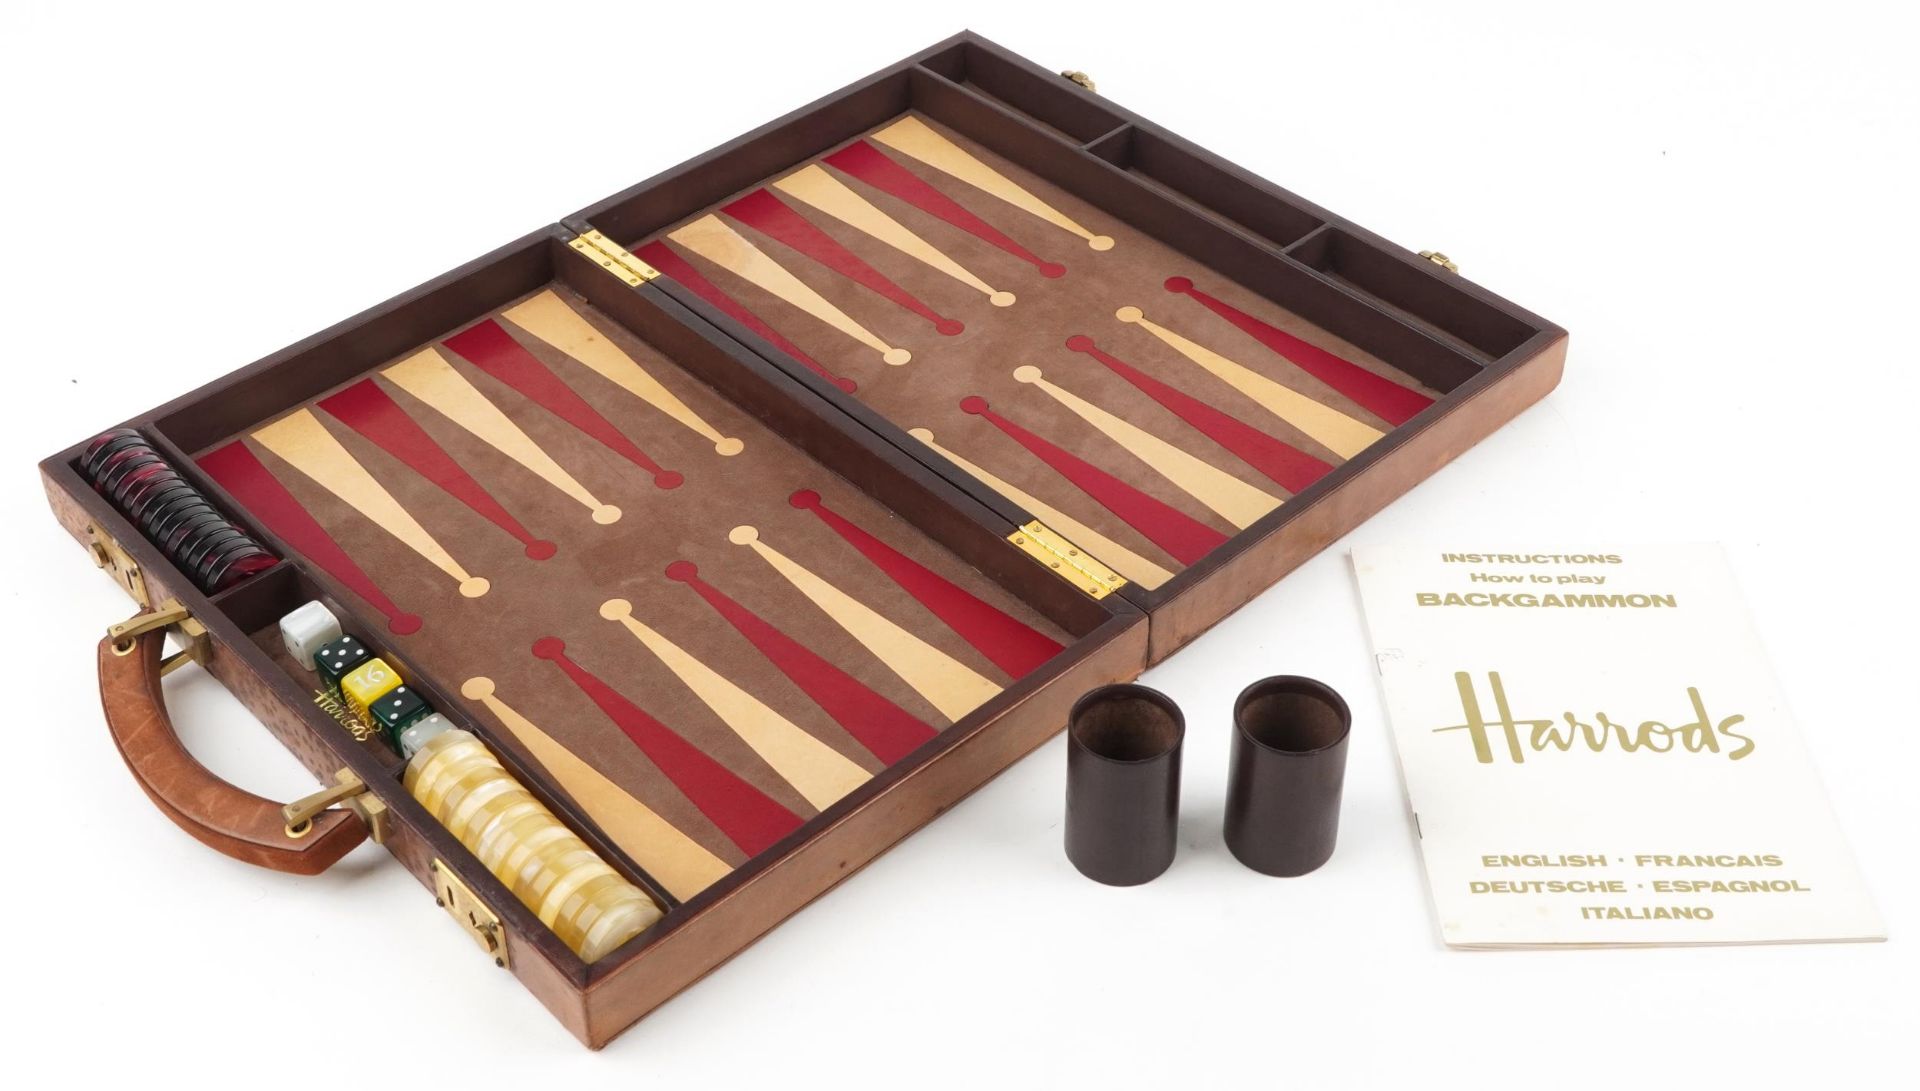 Vintage Harrods travelling Backgammon set with counters in the form of a briefcase